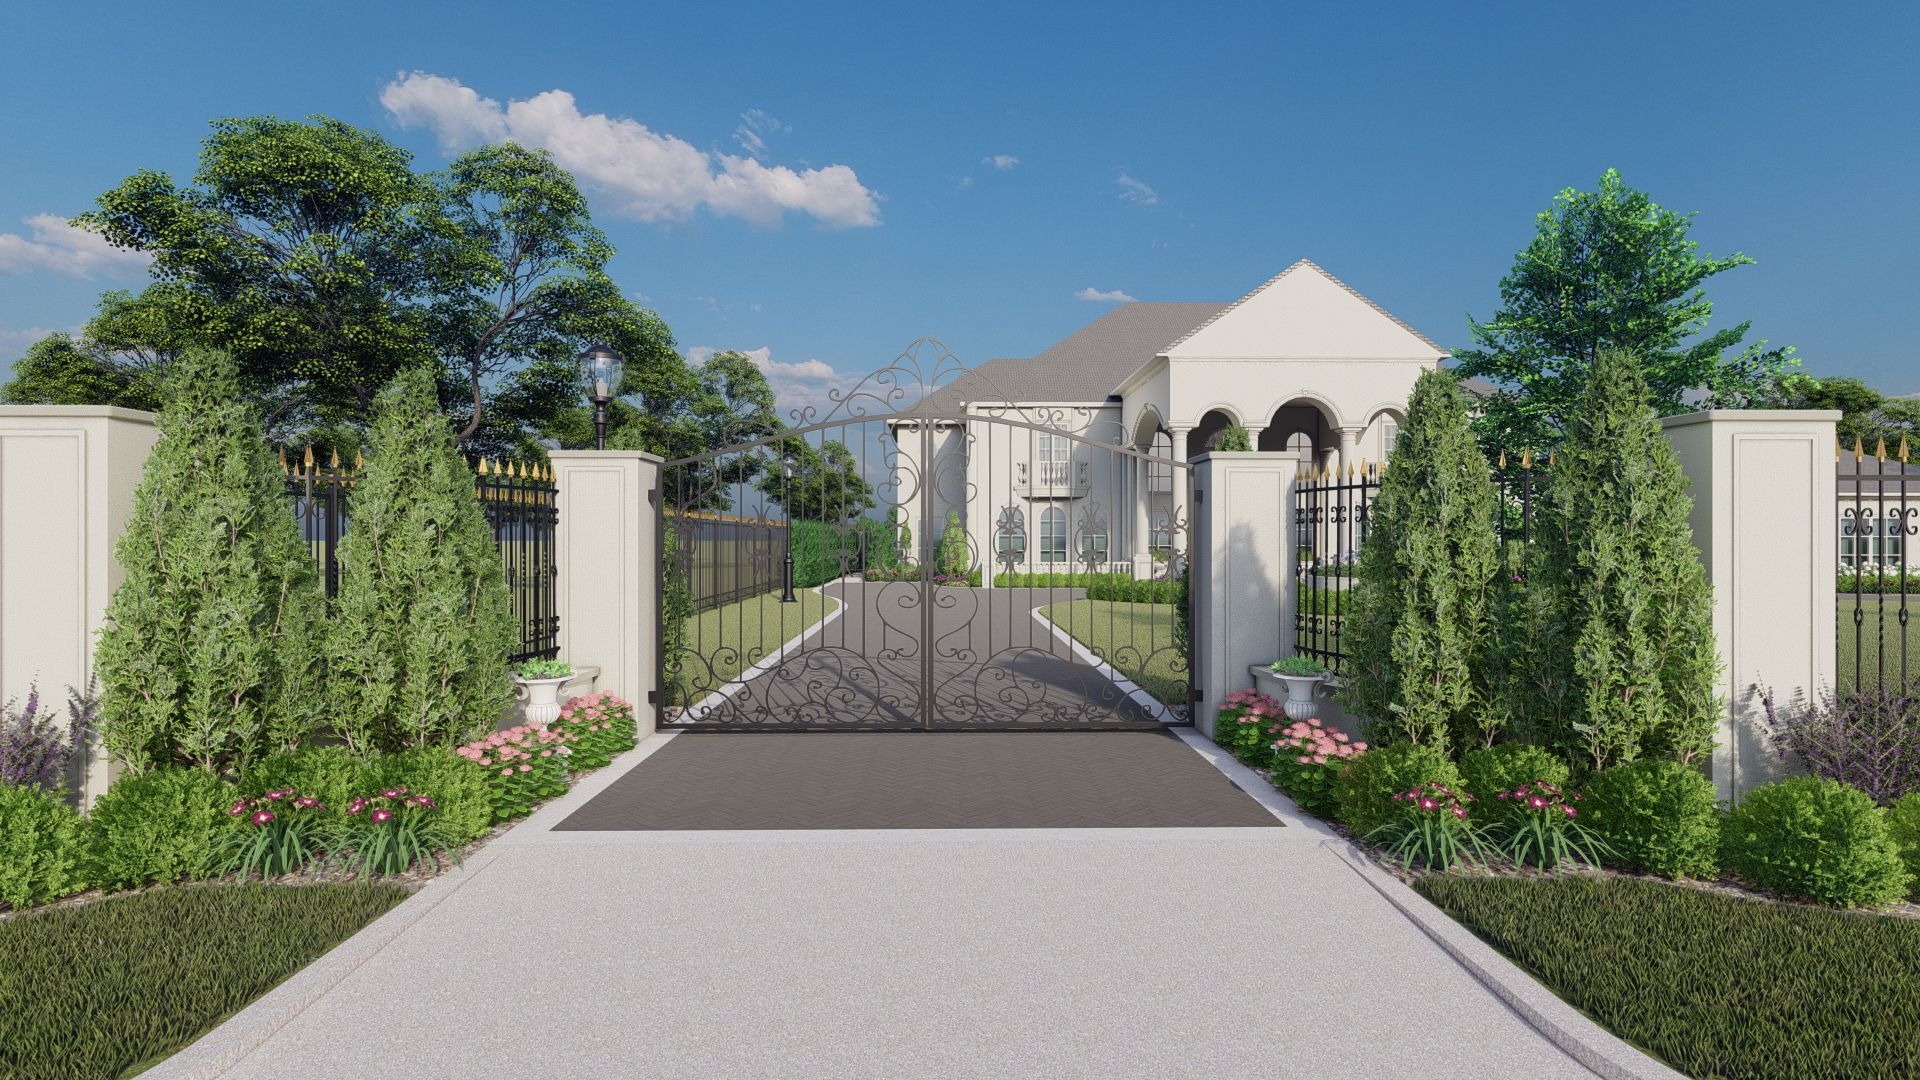 formal garden design, a beautiful contemporary gate with driveway to the front of the house 